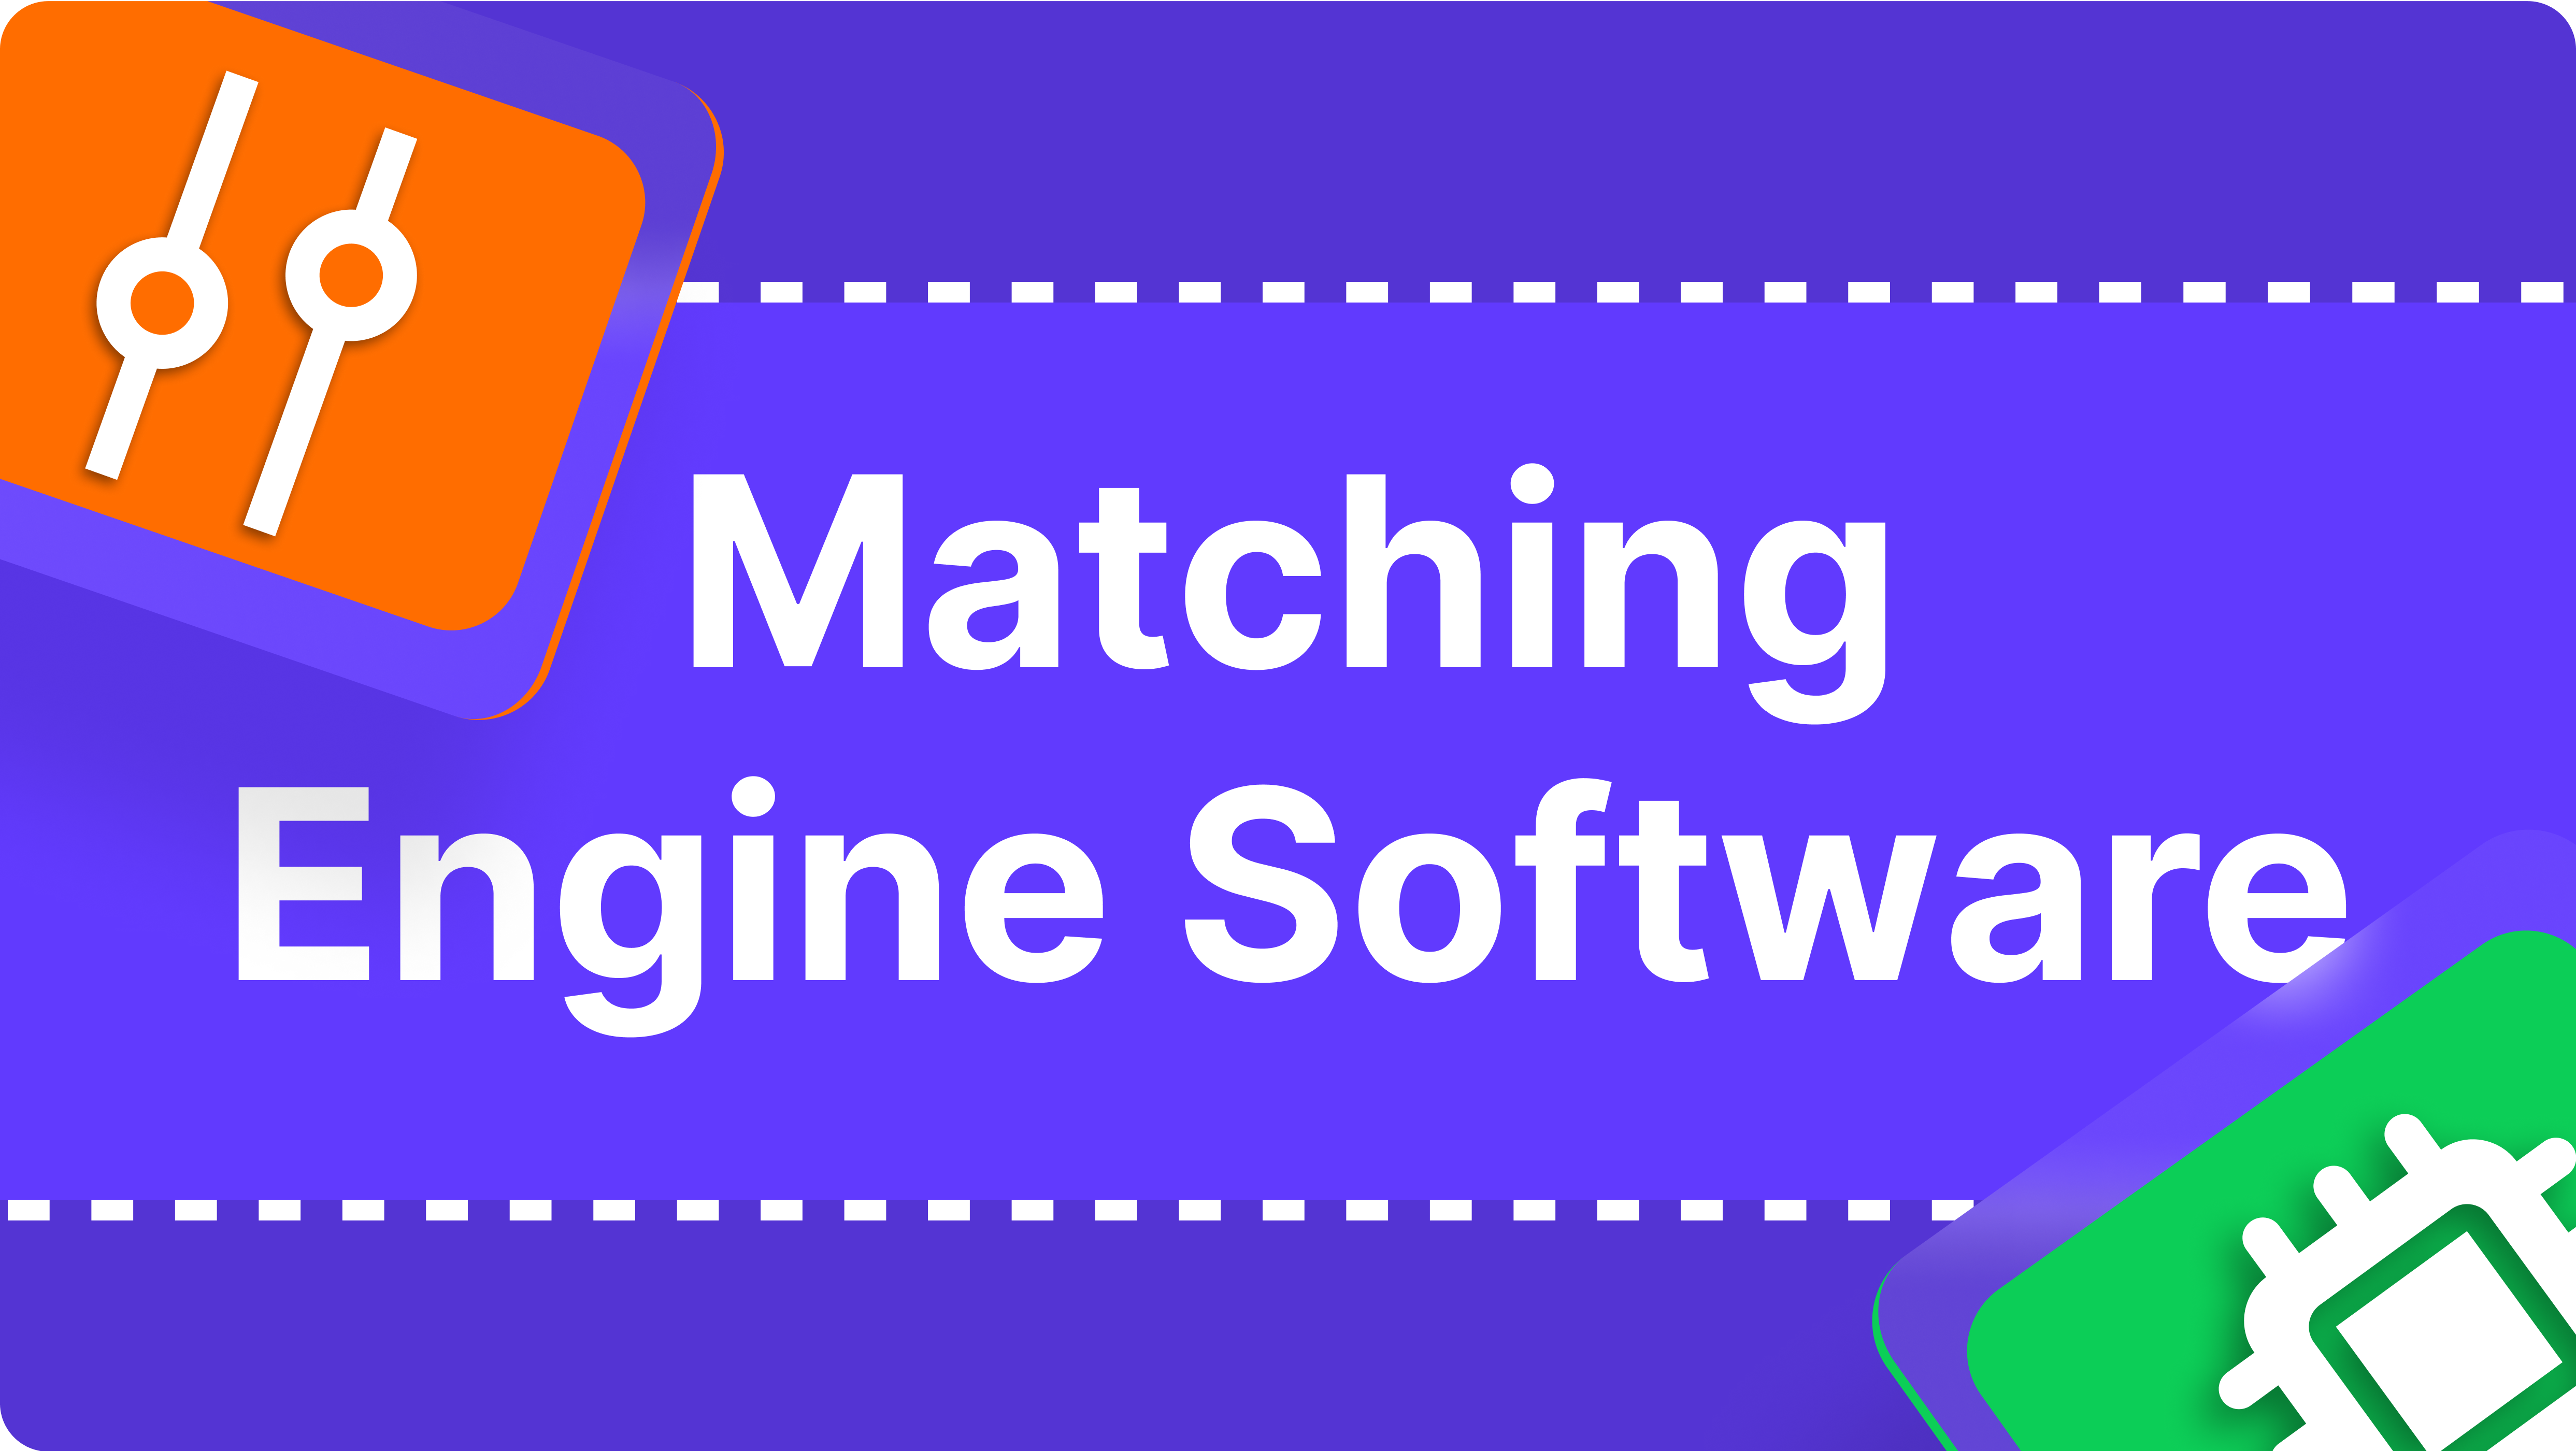 How Matching Engine Software Works and Helps Execute Trades